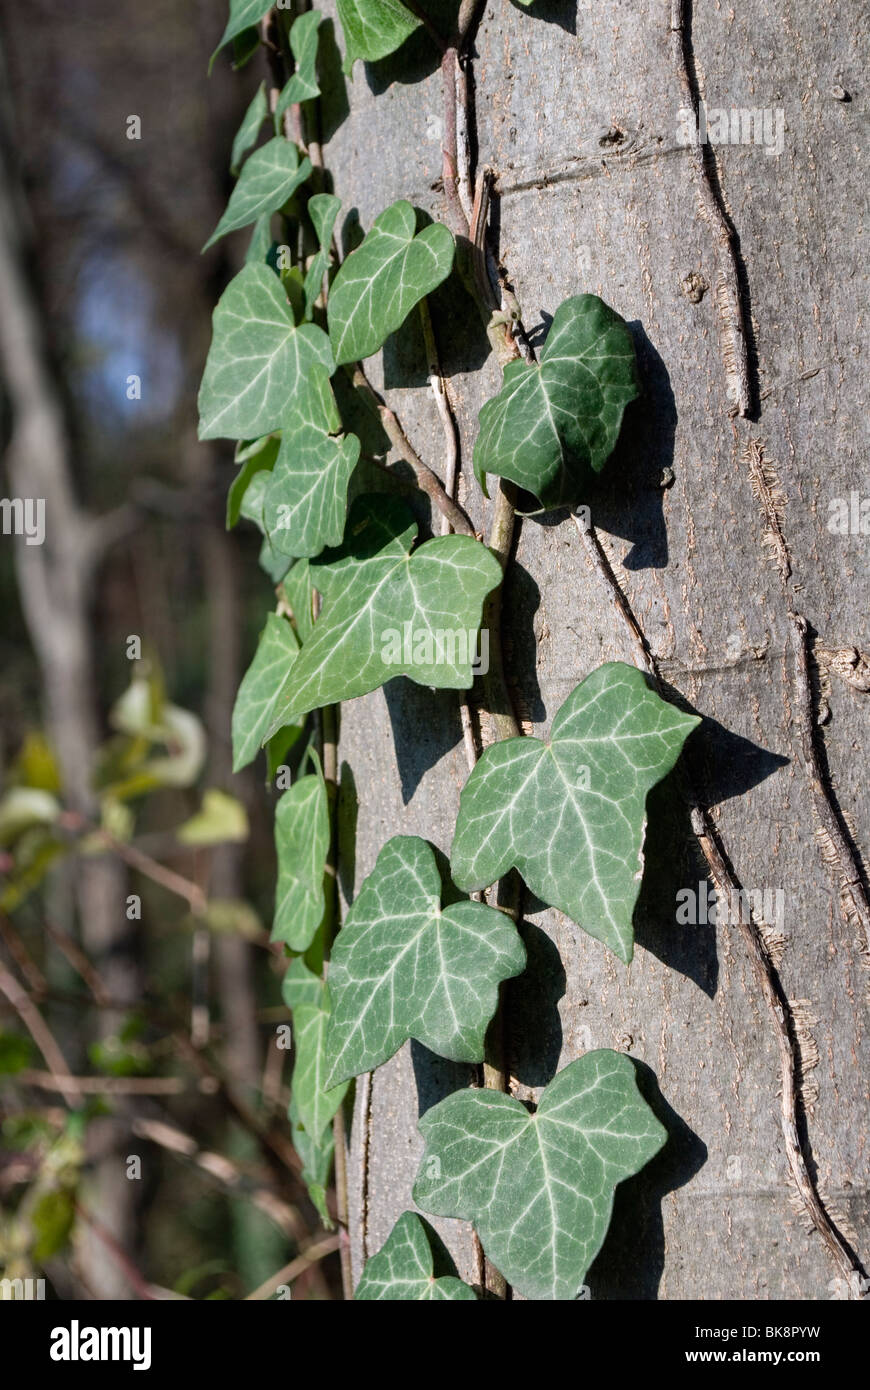 ivy Hedera helix on tree trunk Stock Photo